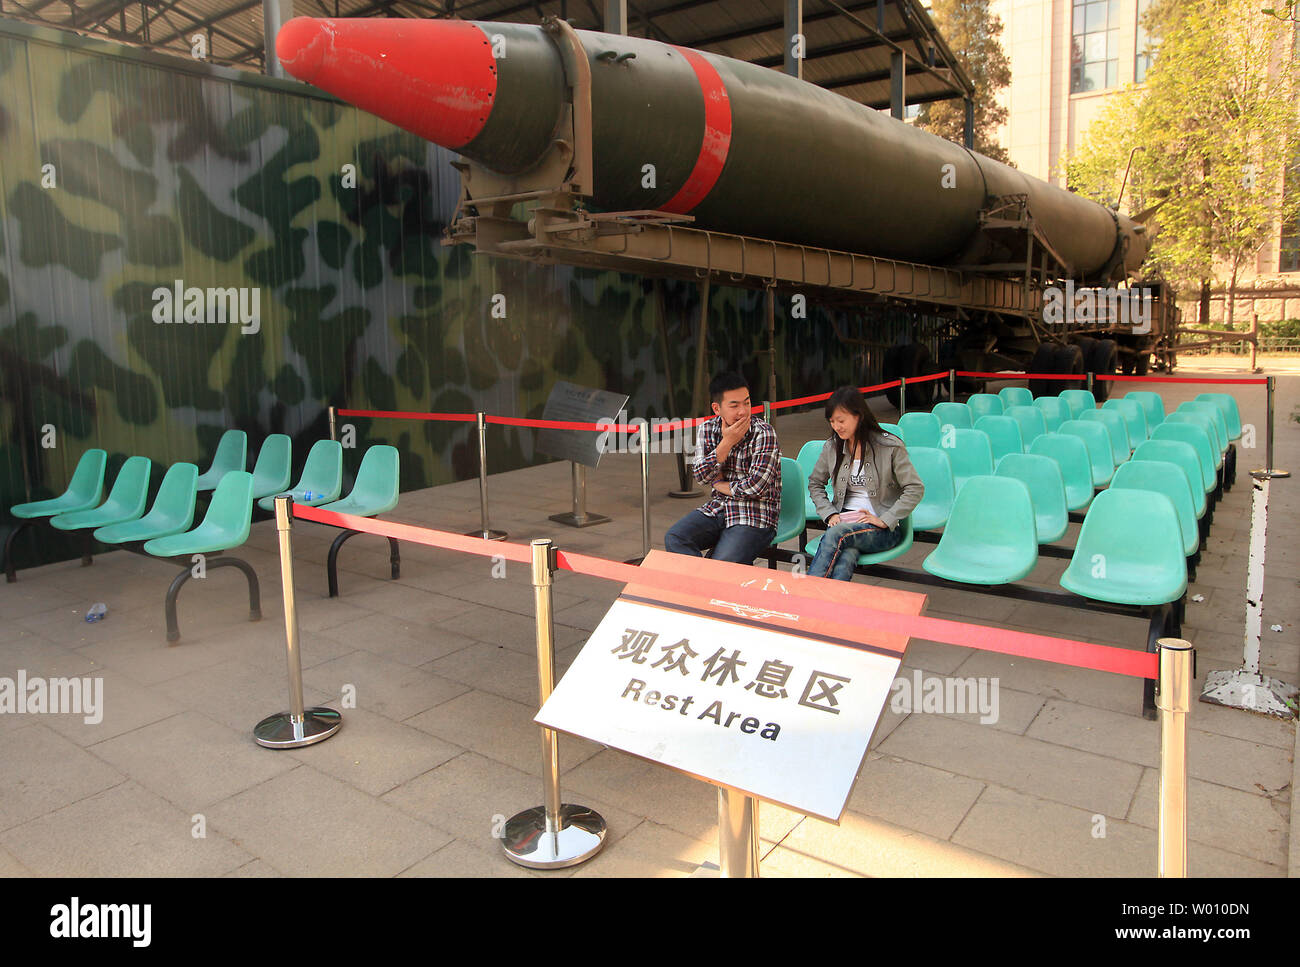 Chinese tourists relax near a Dongfeng 1, a copy of the Soviet R-2 (SS-2), on display at China's National Military Museum, meant to showcase the country's military might, in Beijing April 15, 2012.  The United States has underestimated the growth of China's military as American policymakers have taken official statements at face value or failed to understand Beijing's thinking, according to a recent study by a security commission.   UPI/Stephen Shaver Stock Photo